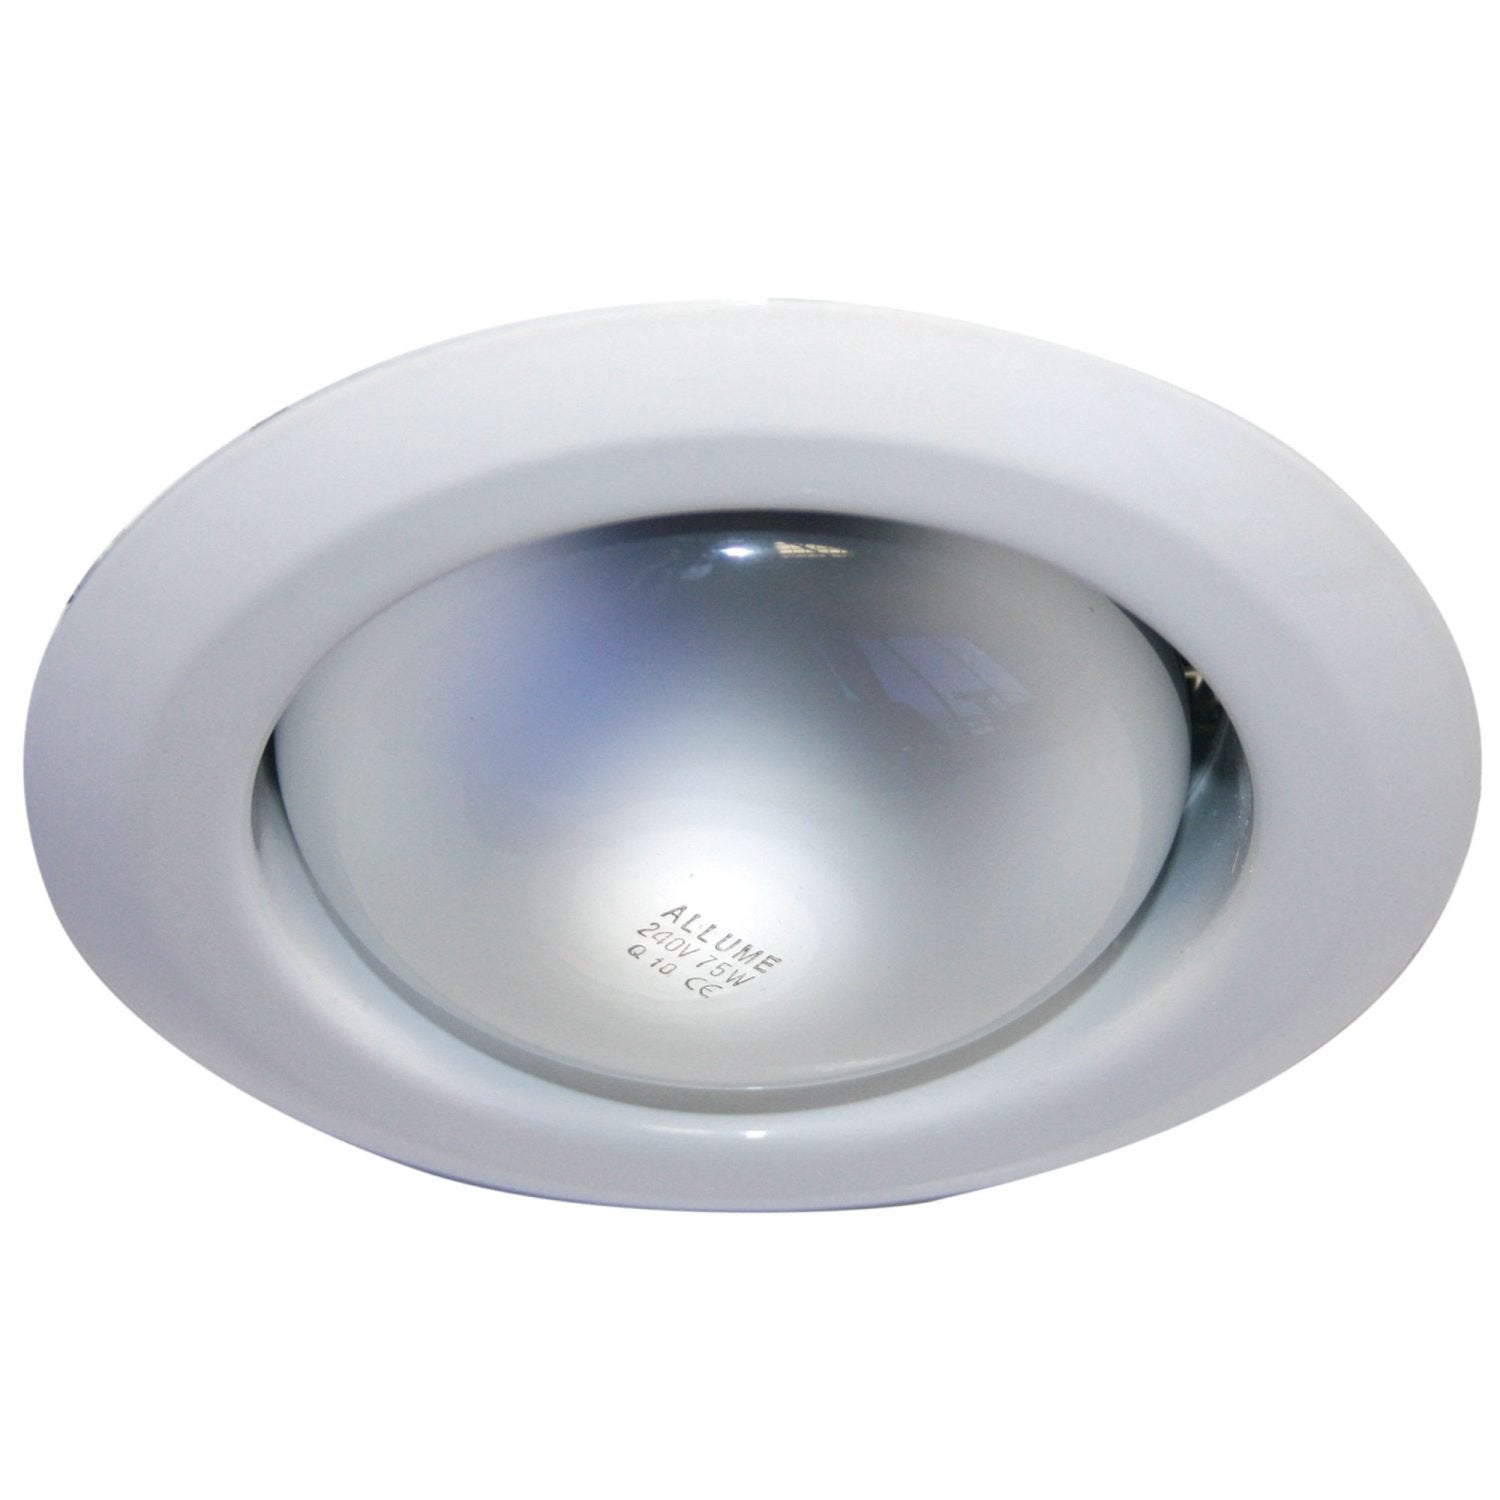 Project R80 Downlight White - LF4325WH